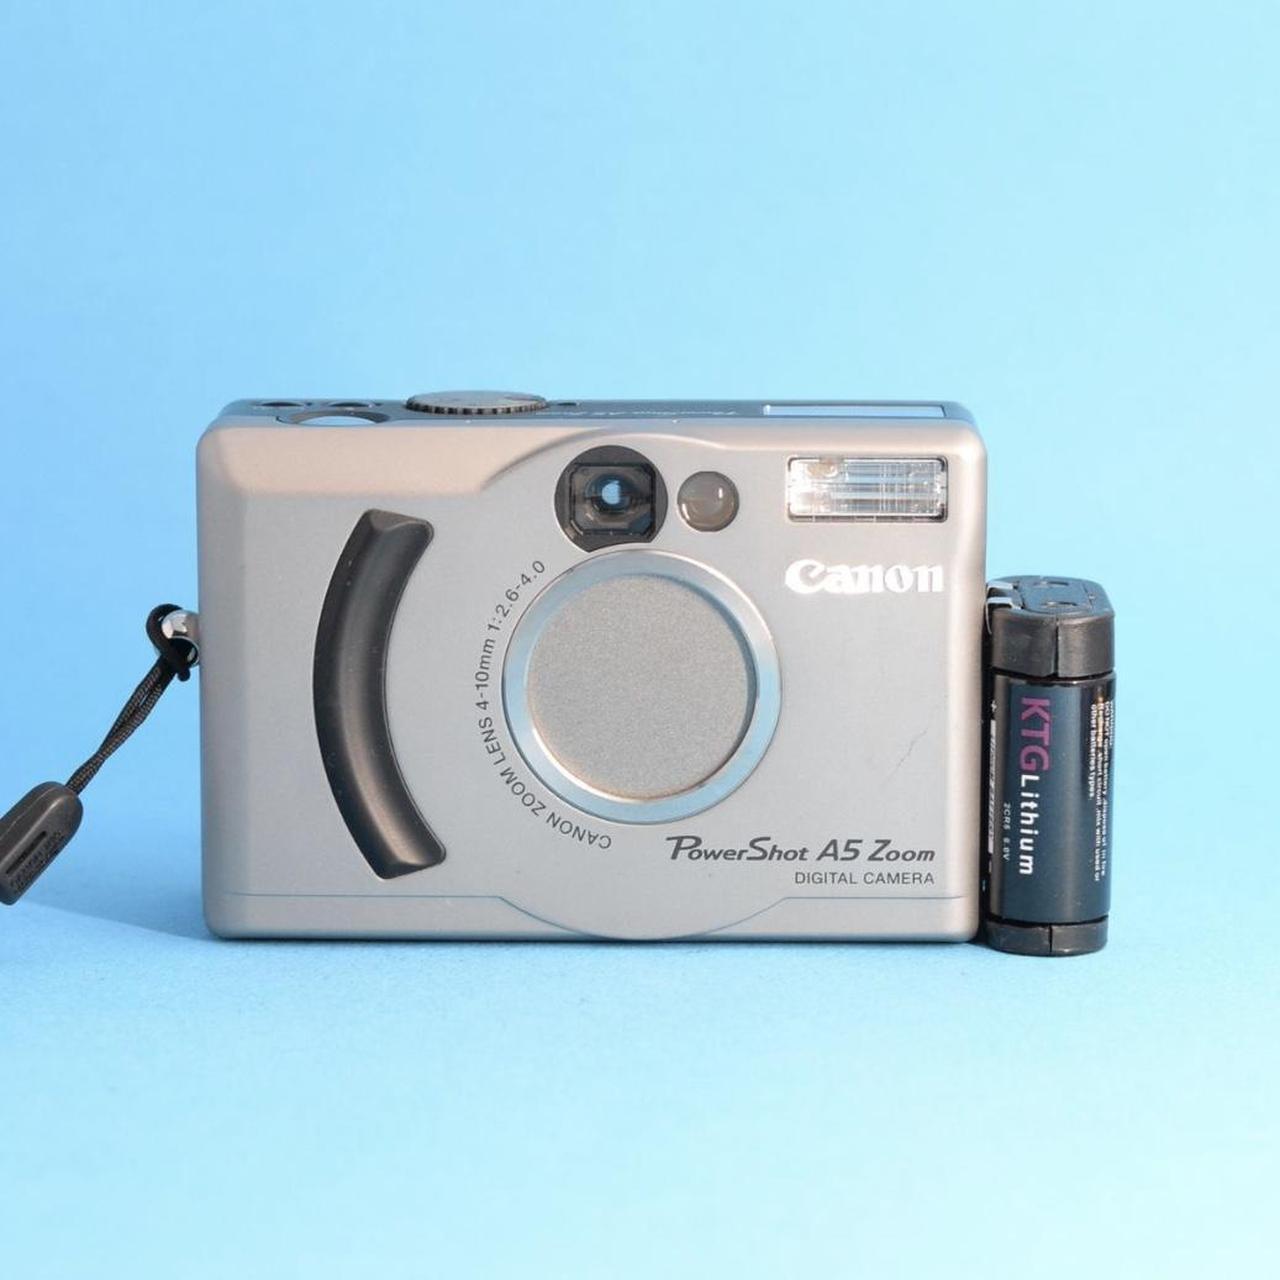 Canon PowerShot A5 Zoom | 5MP Digital camera with CF...